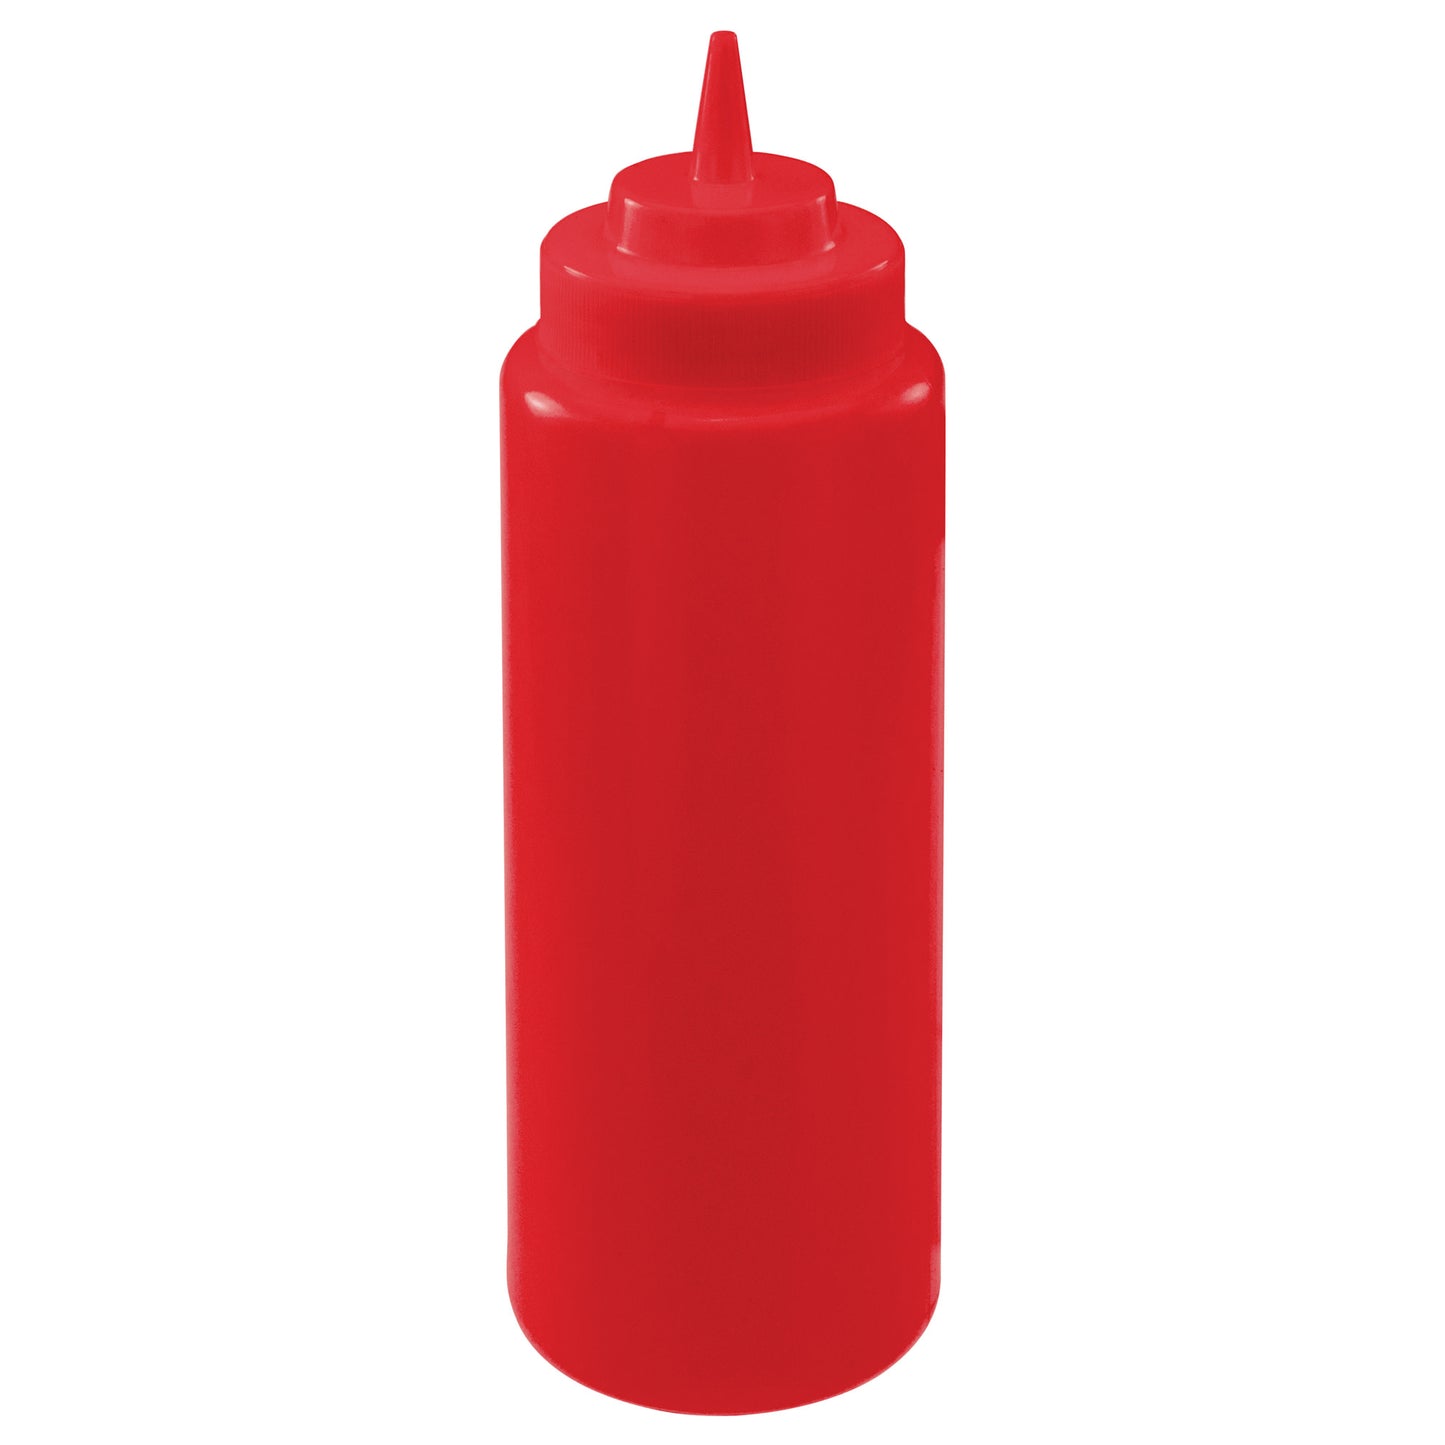 PSW-32R - 32oz Wide-Mouth Squeeze Bottles - Red